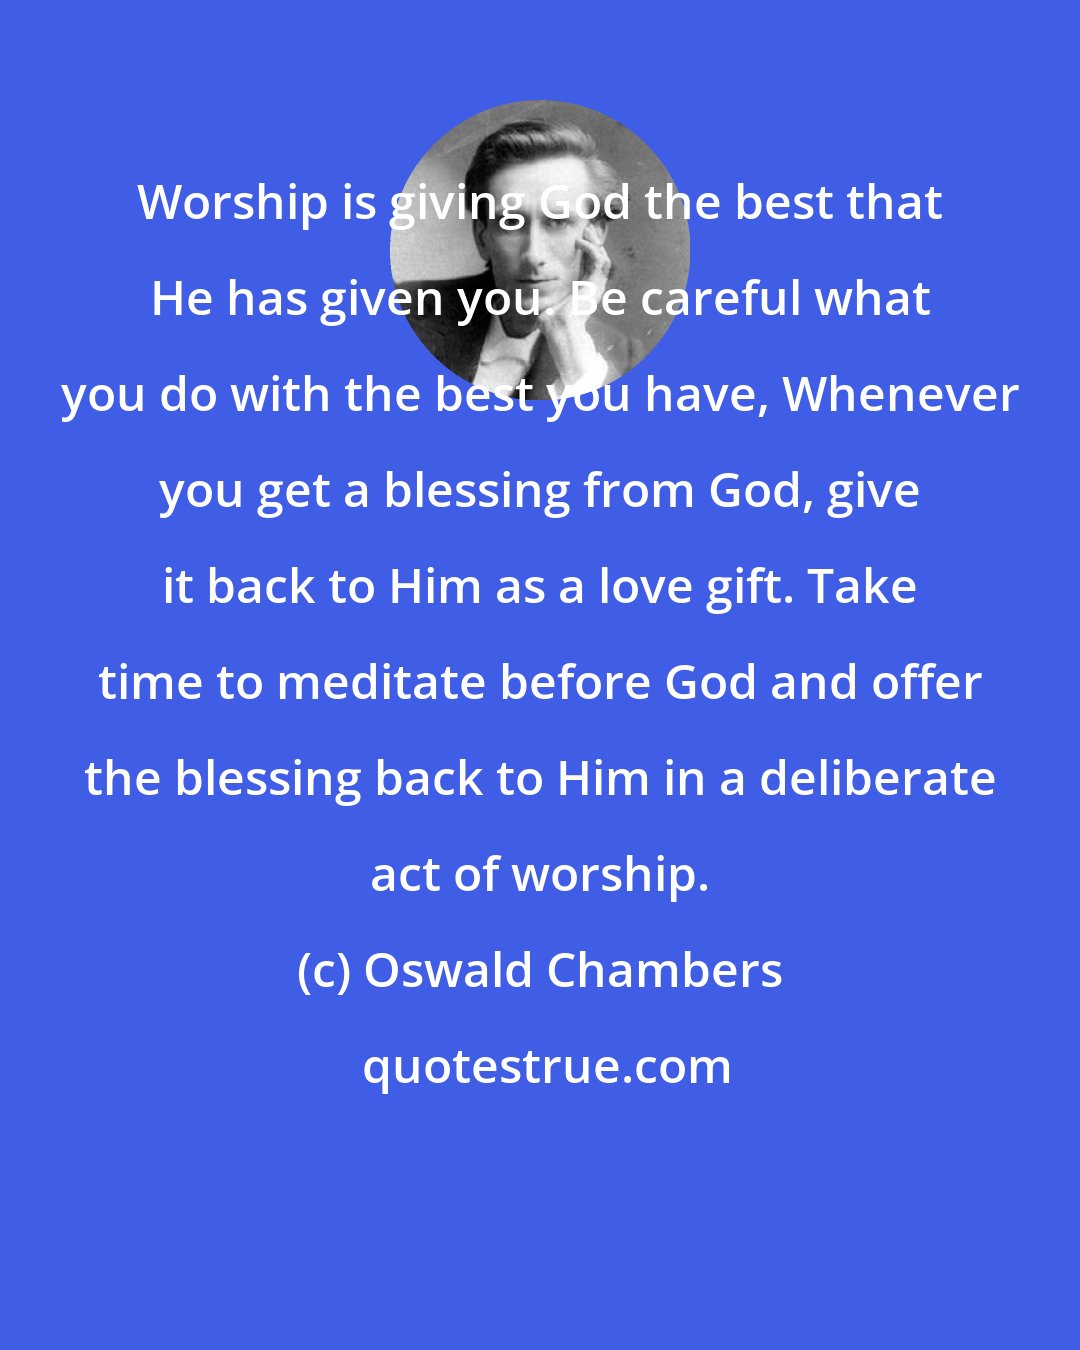 Oswald Chambers: Worship is giving God the best that He has given you. Be careful what you do with the best you have, Whenever you get a blessing from God, give it back to Him as a love gift. Take time to meditate before God and offer the blessing back to Him in a deliberate act of worship.